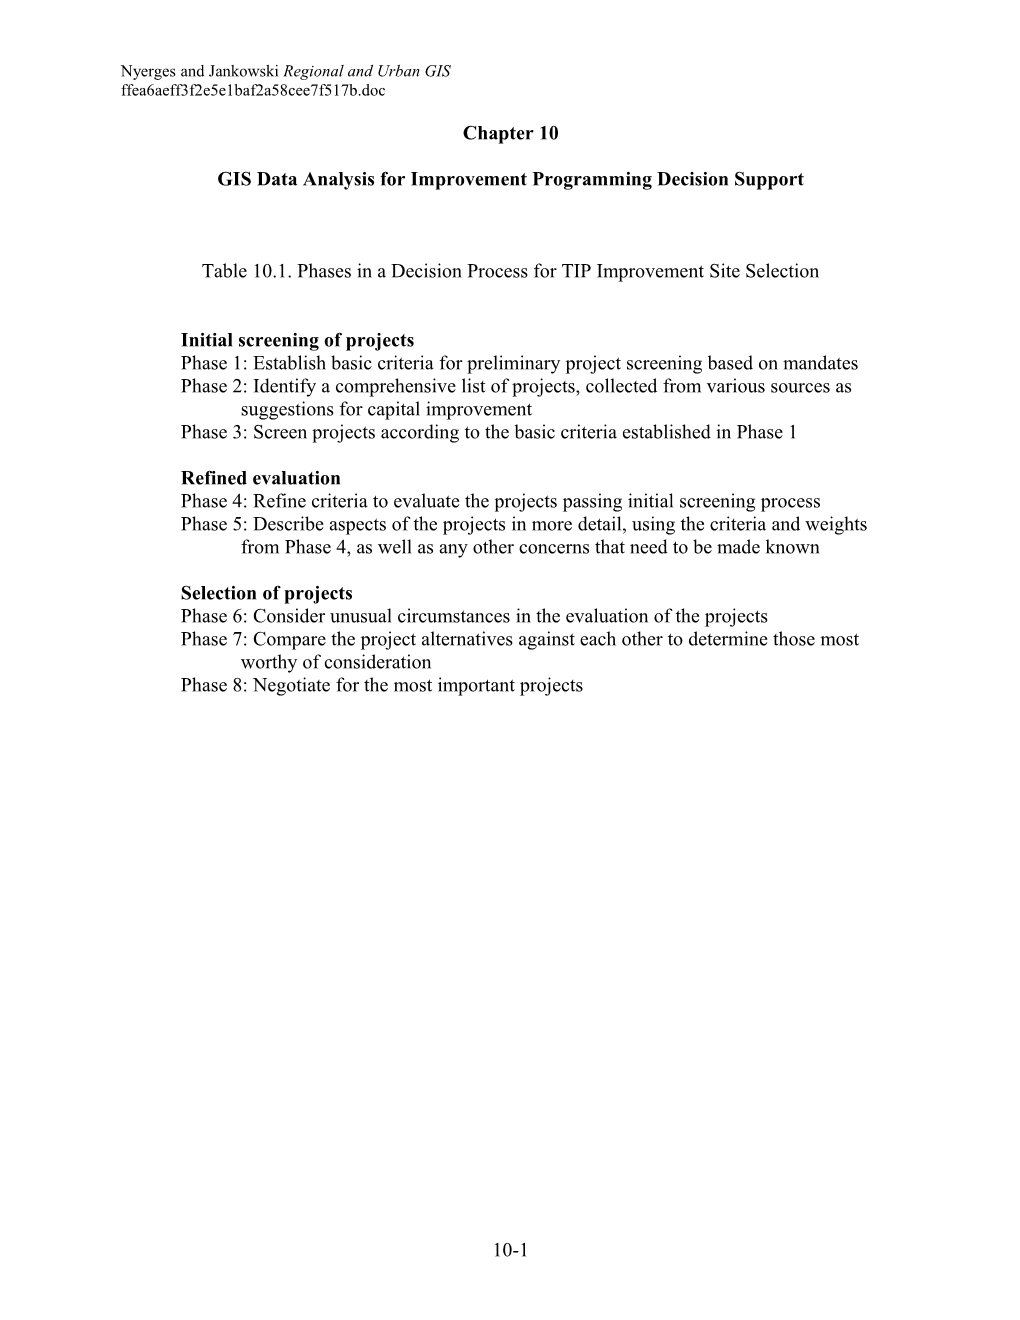 Chapter 10 GIS Data Analysis for Improvement Programming Decision Support